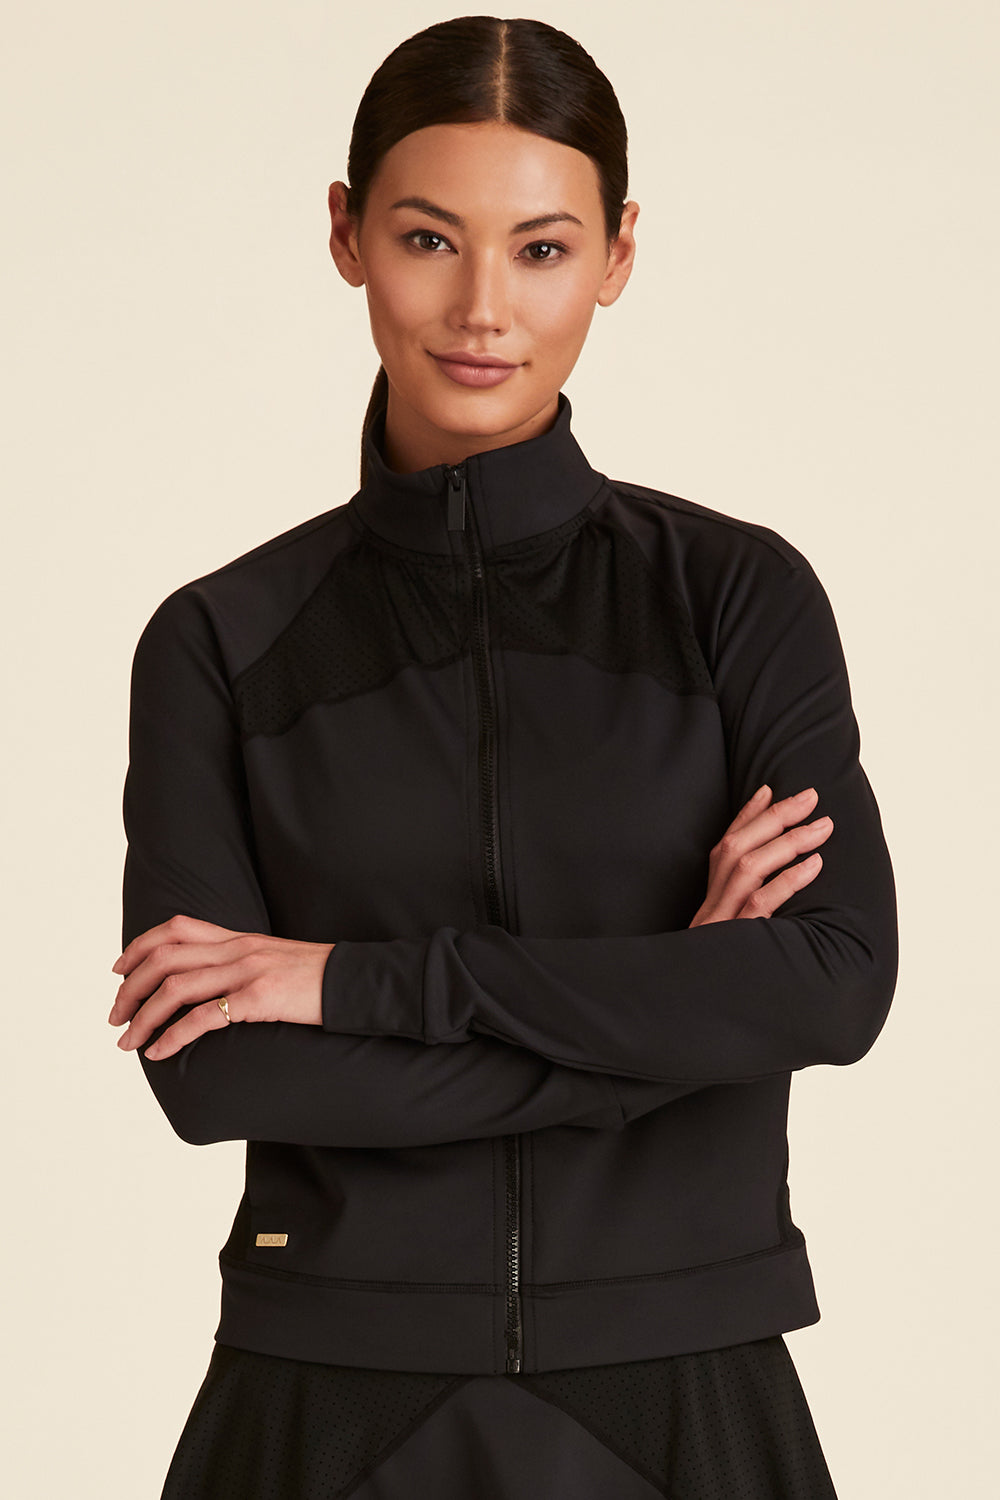 Black tennis jacket for women from Alala activewear